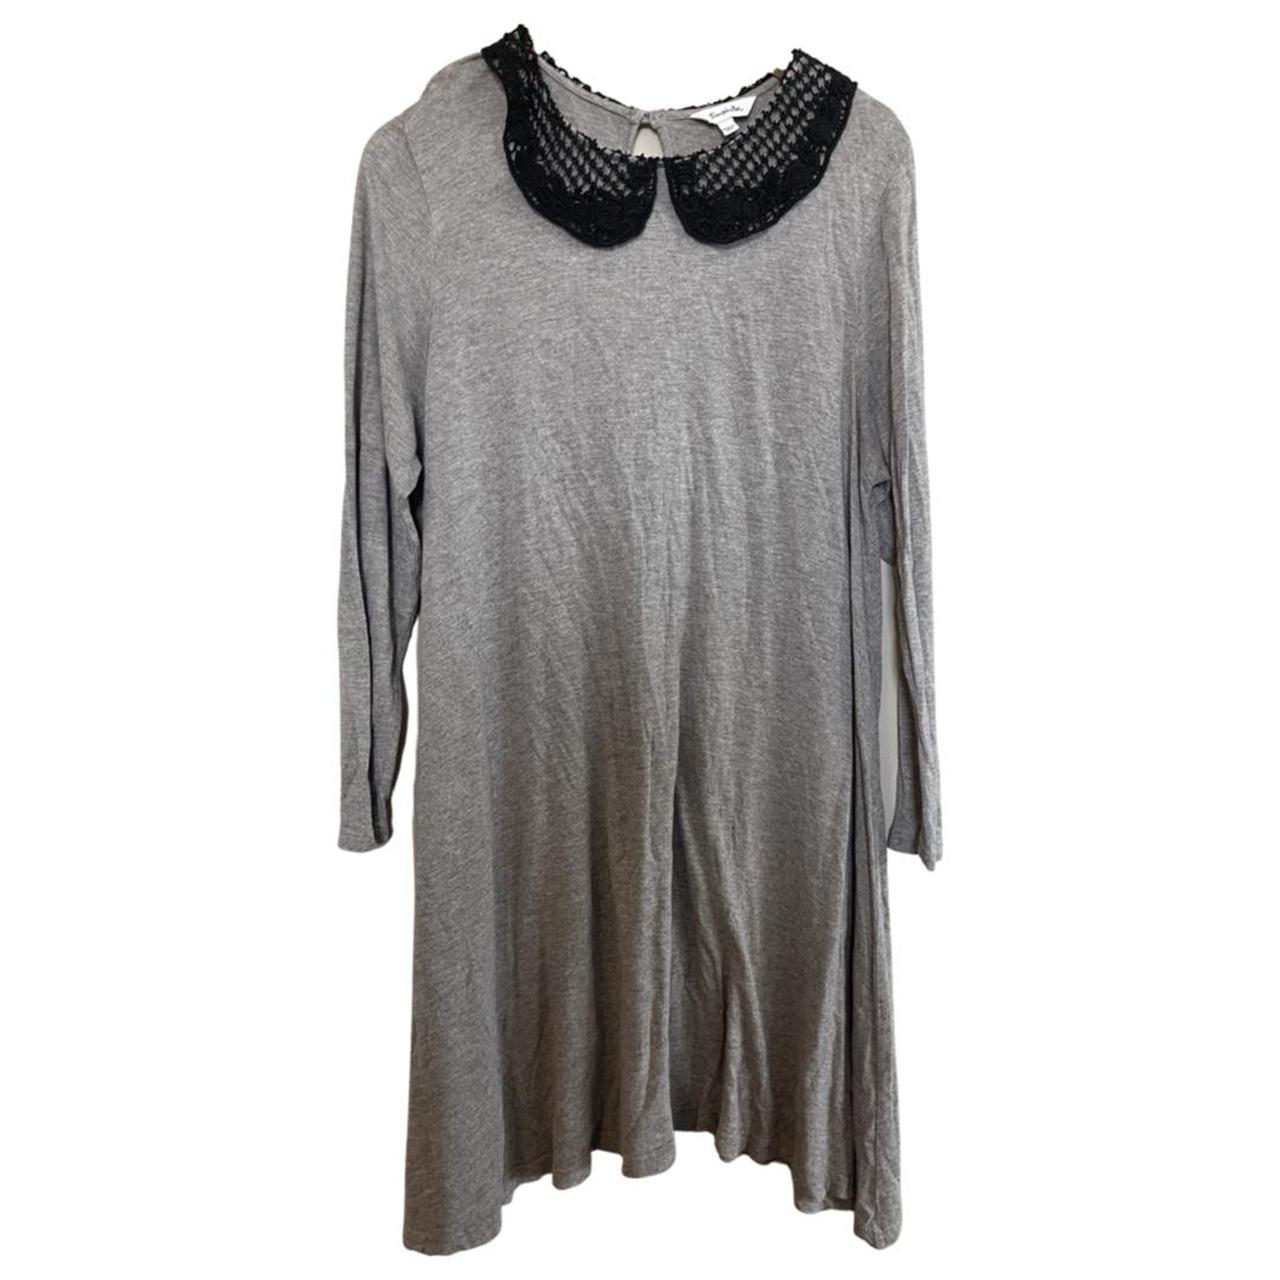 Simply Be Women's Grey and Black Dress